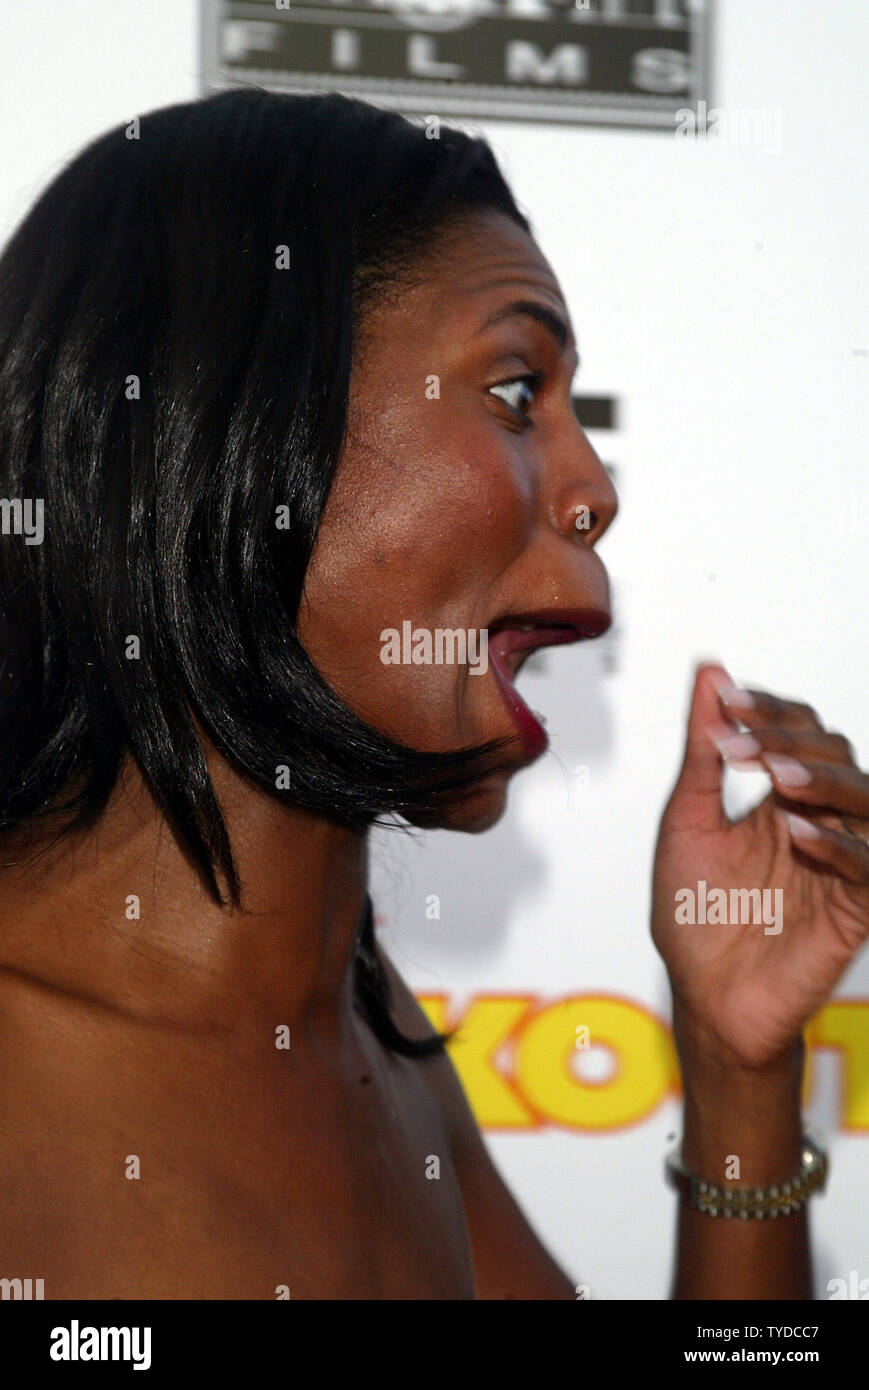 Omarosa Manigault-Stallworth poses for pictures at the premiere 'The Cookout' at the Delano Hotel in South Beach, Miami, Florida on August 28, 2004 .   (UPI Photo/Laura Cavanaugh) Stock Photo